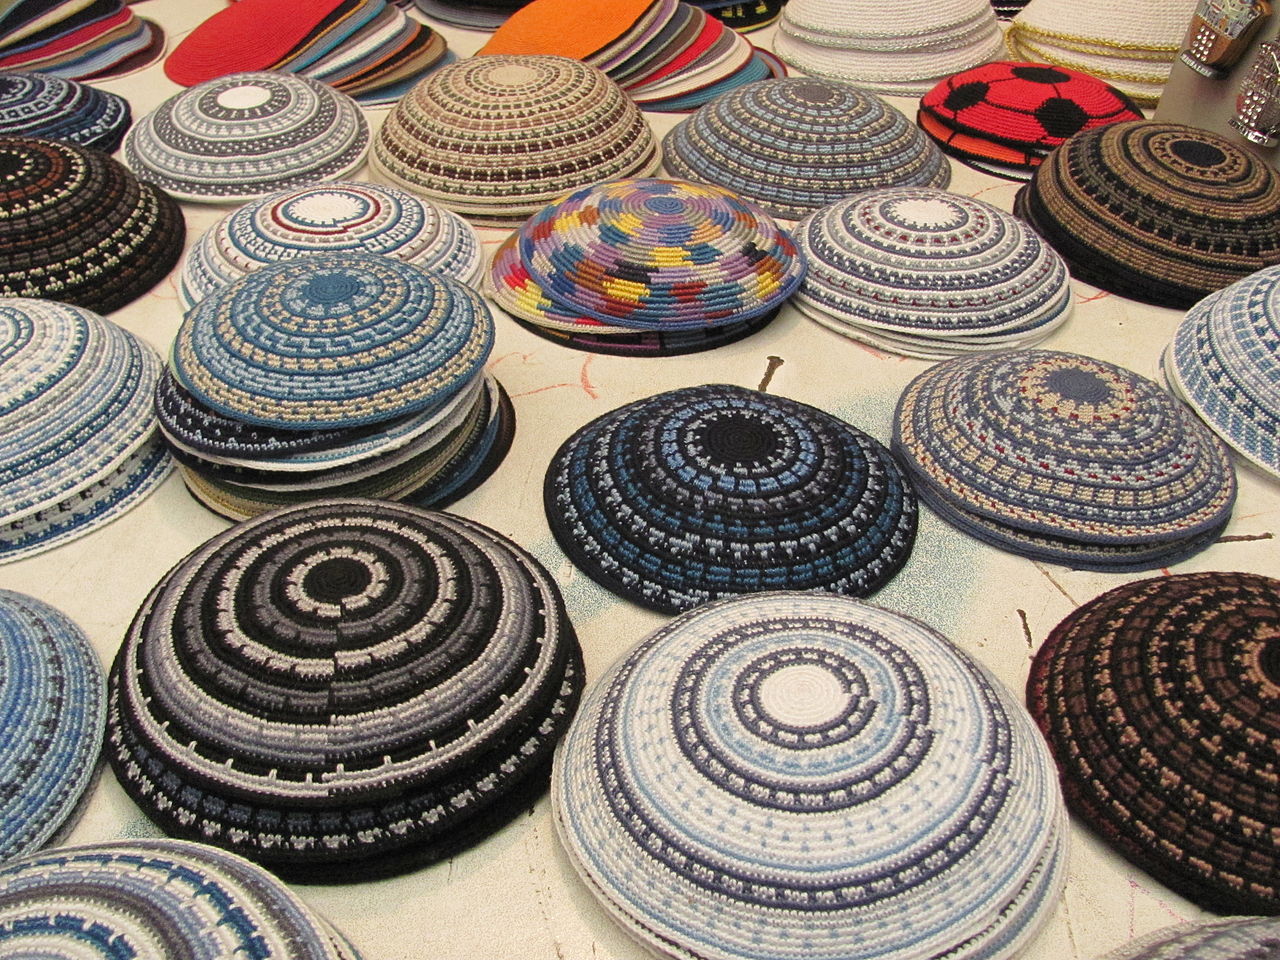 Handmade yarmulkes at a stand in the Old City of Jerusalem. Yarmulkes are described in text.